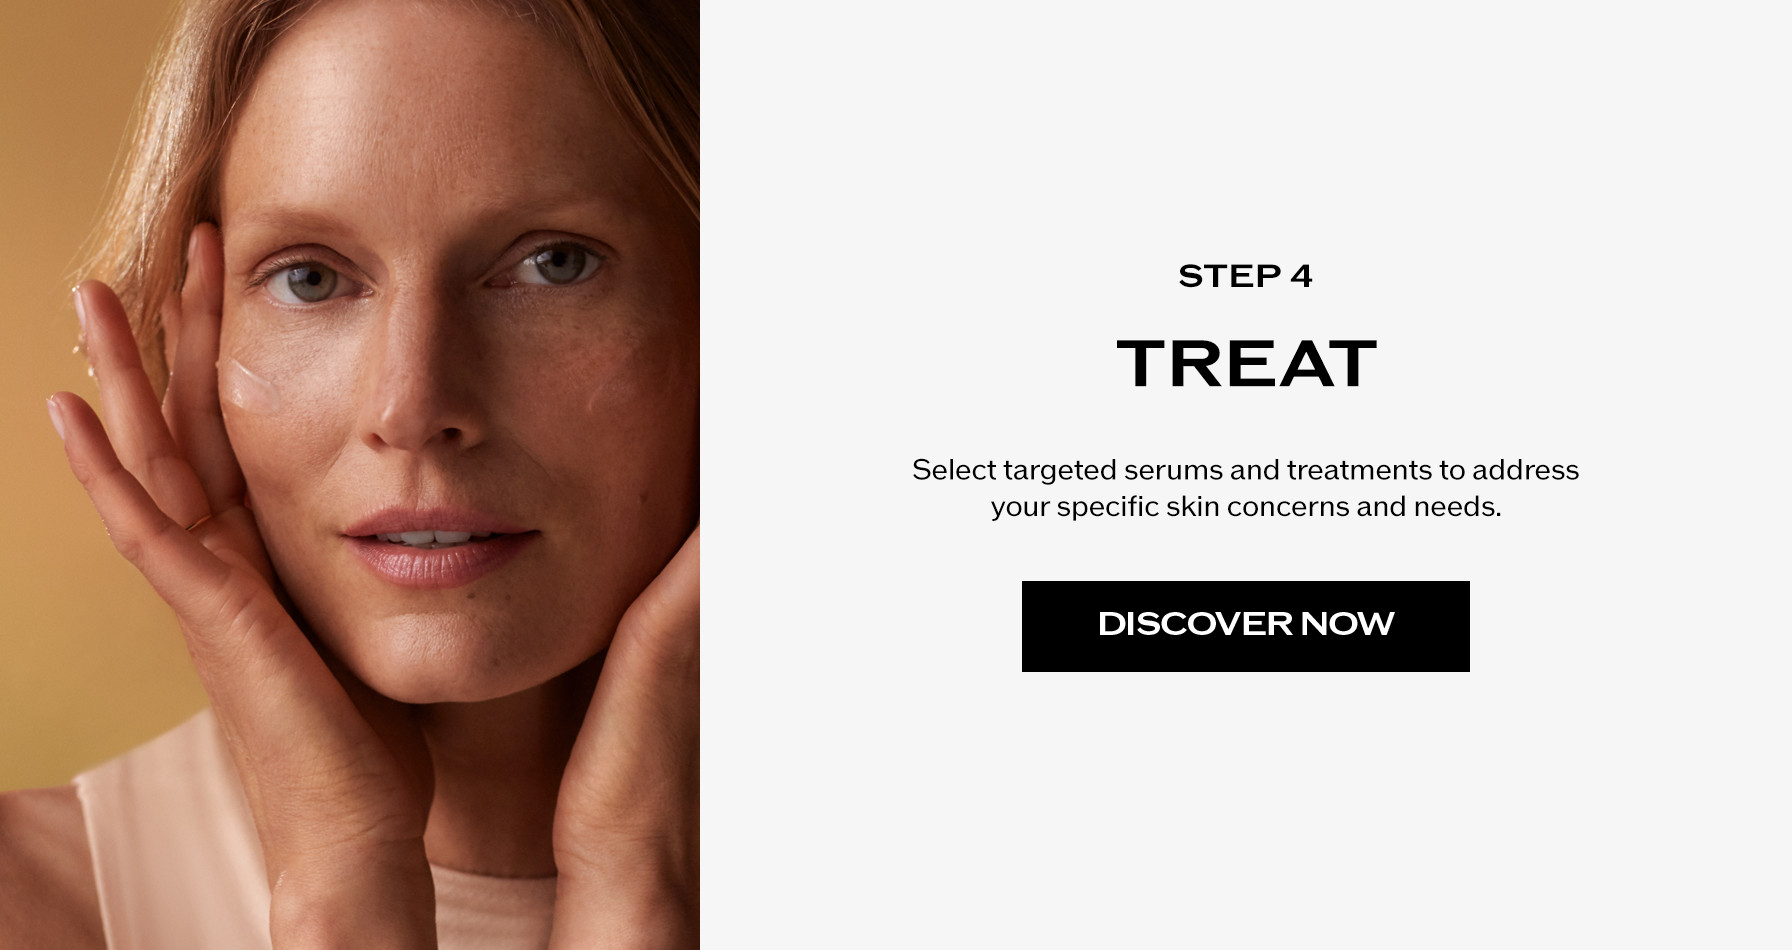 Step 4: Treat. Select targeted serums and treatments to address your specific skin concerns and needs.